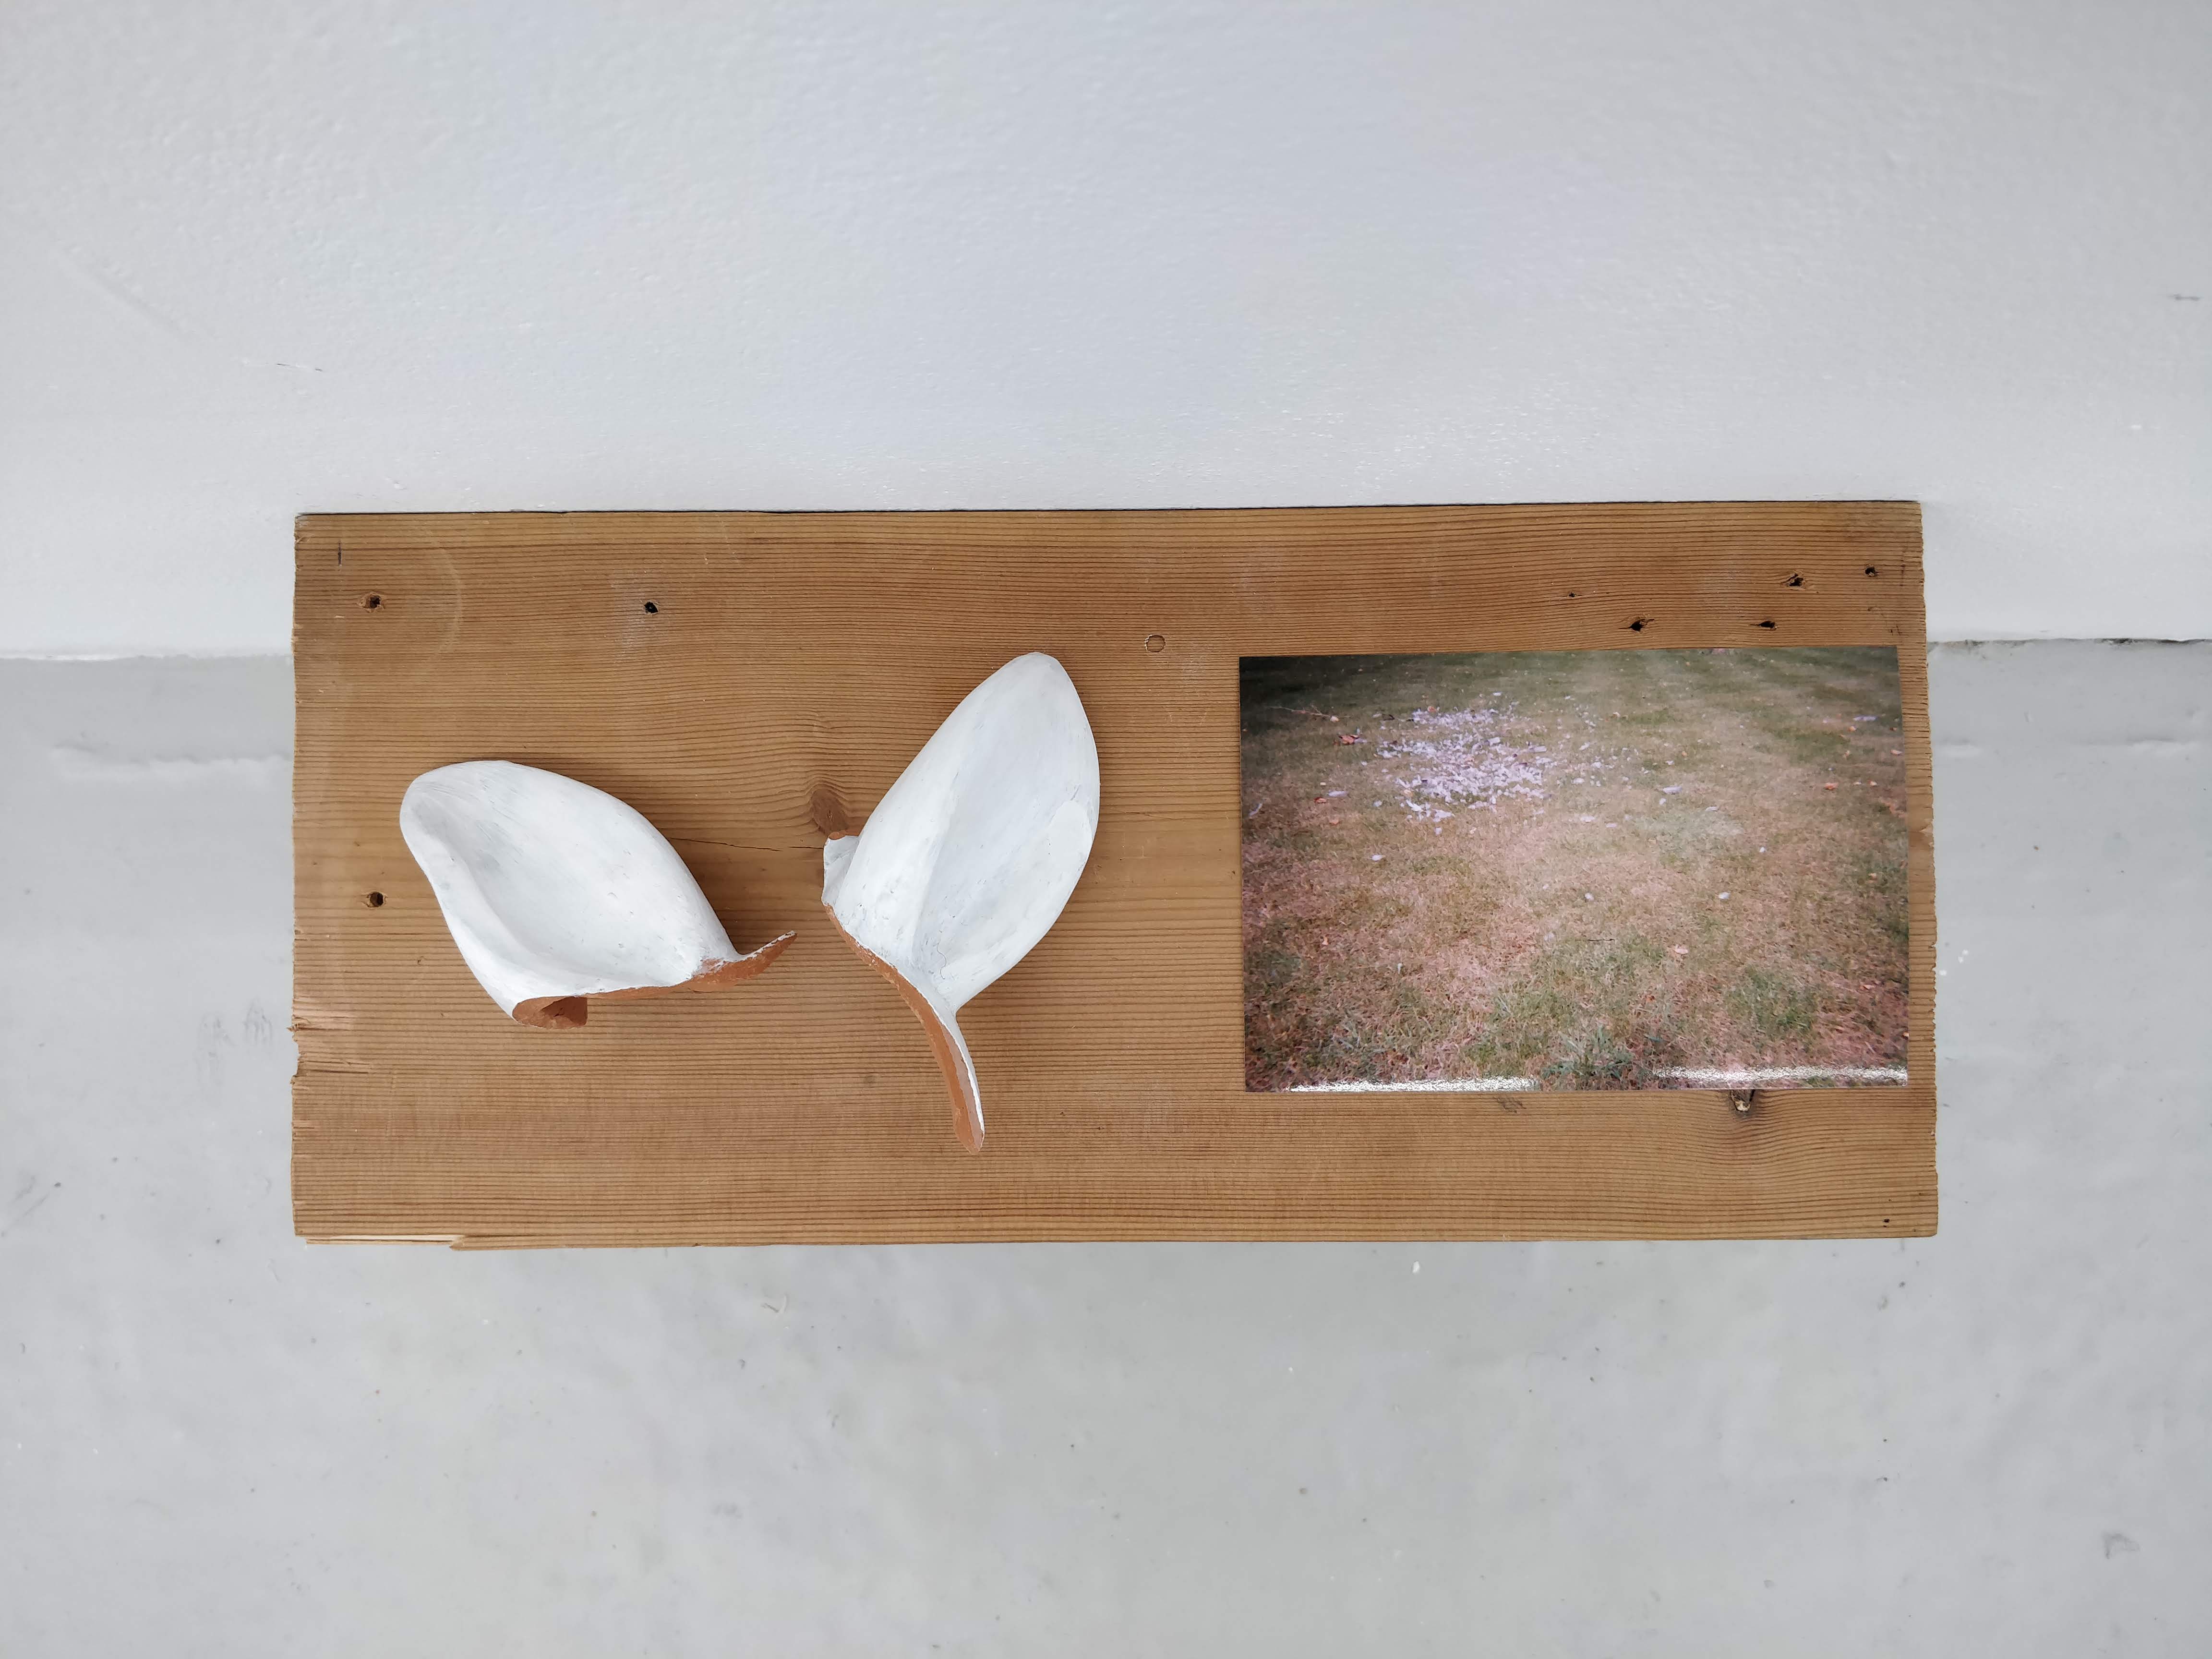 BA Fine Art work by Molly Jackson showing a view from above of a wooden shelf with a pair of white rabbit ears and photograph of scattered feathers on grass.